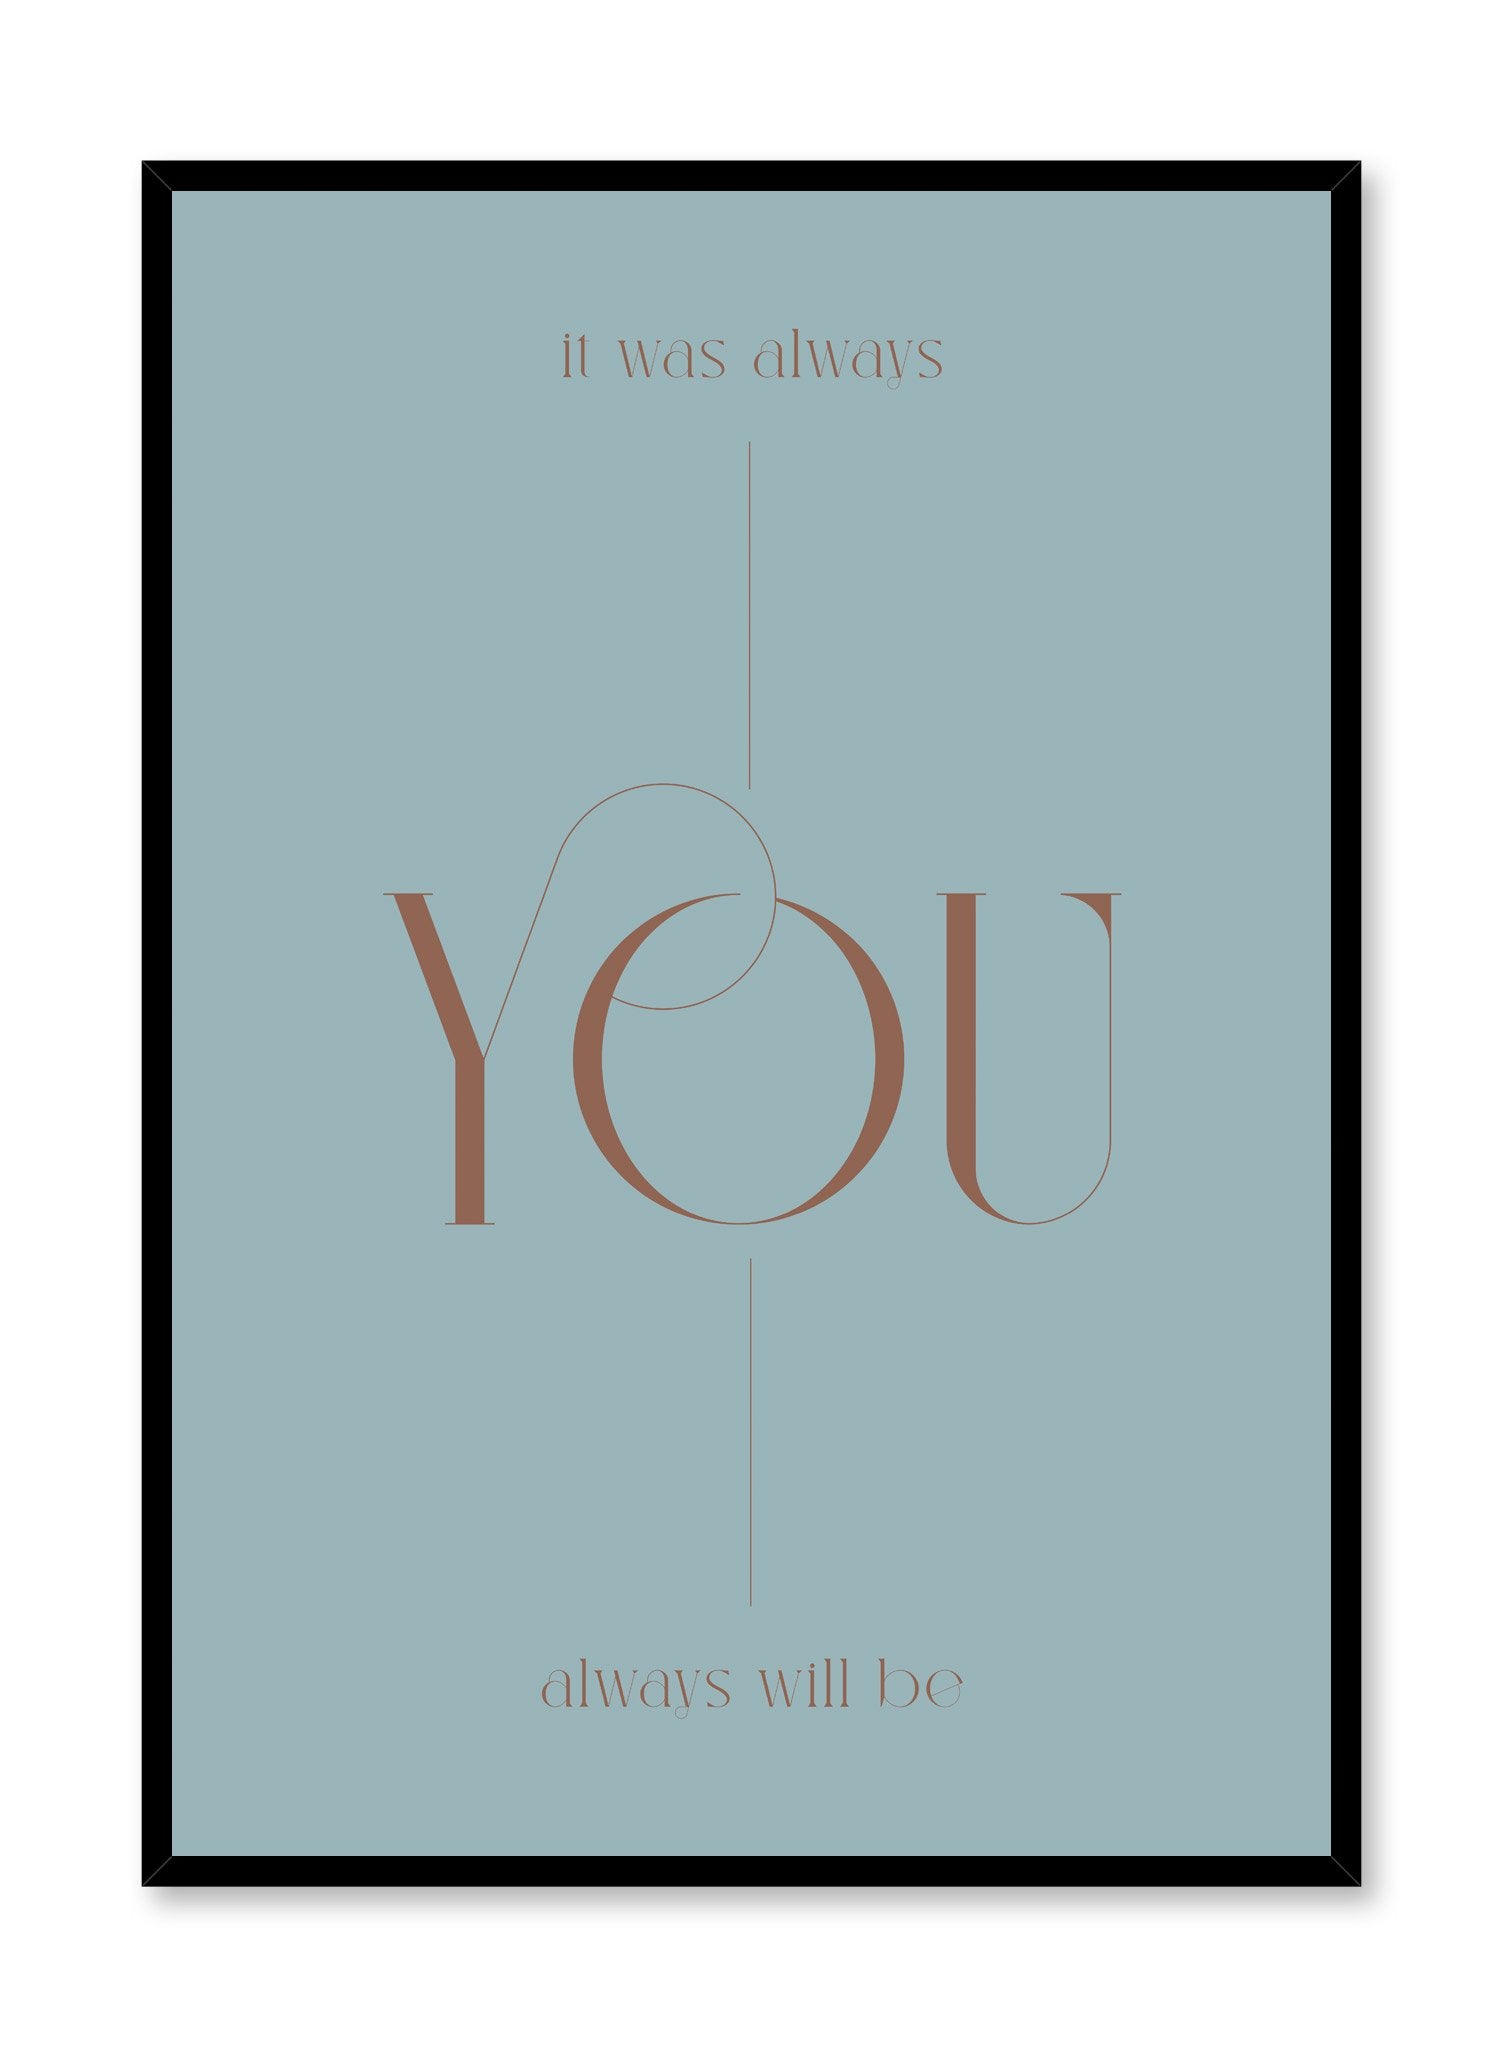 "It Was Always You" is a minimalist typography poster by Opposite Wall of the word’s “it was always you and always will be” over a light blue background in vintage lettering.